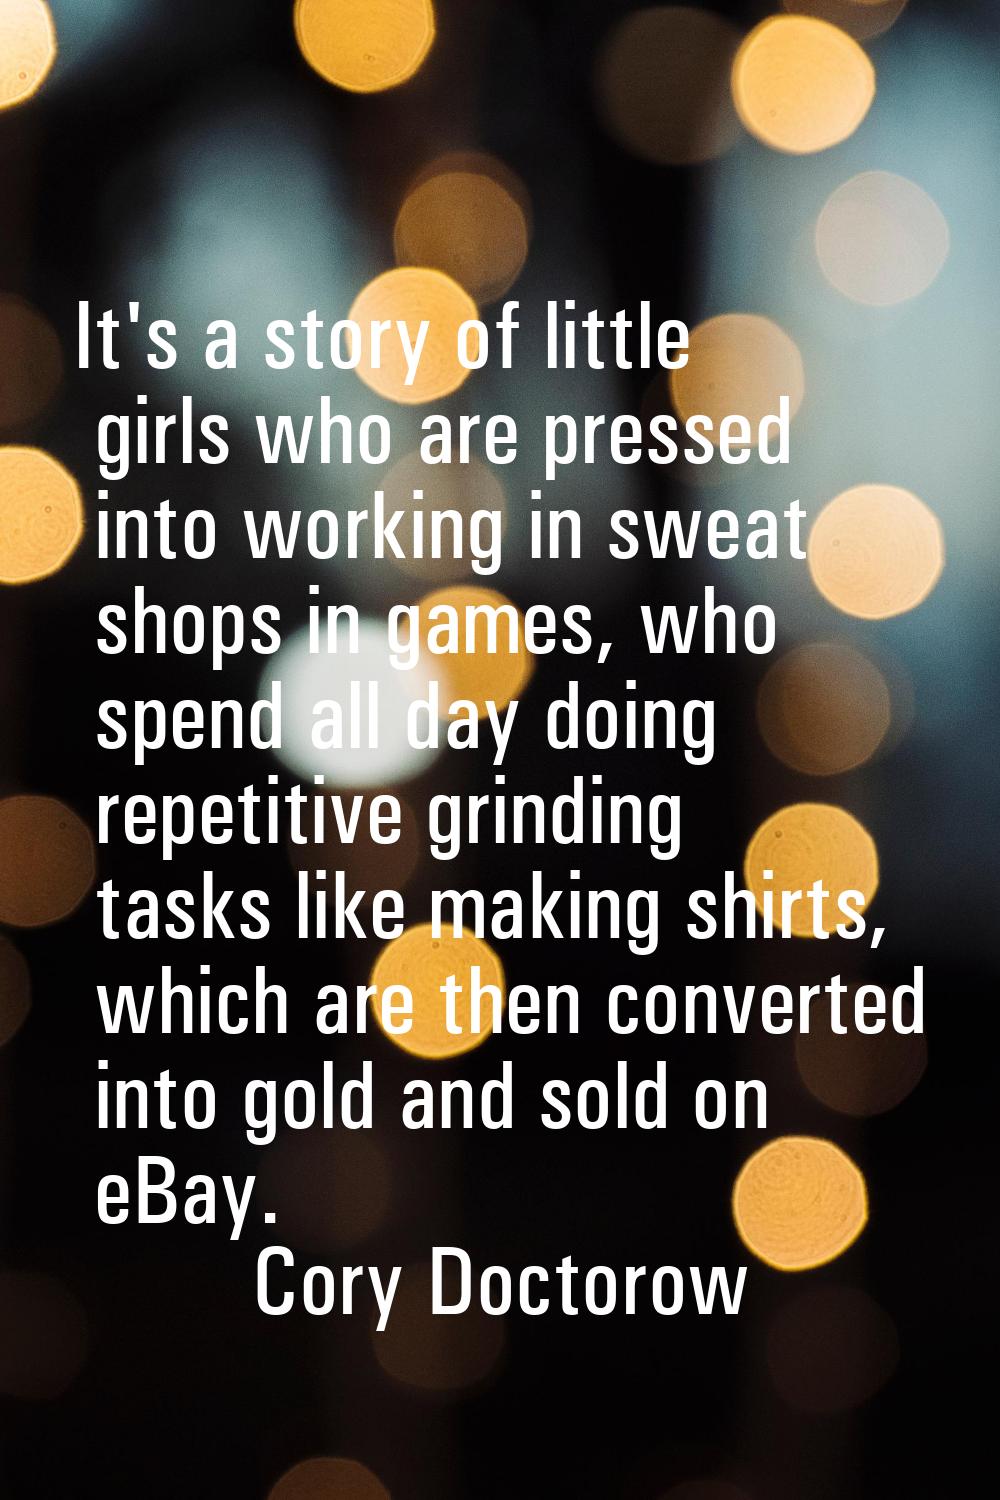 It's a story of little girls who are pressed into working in sweat shops in games, who spend all da